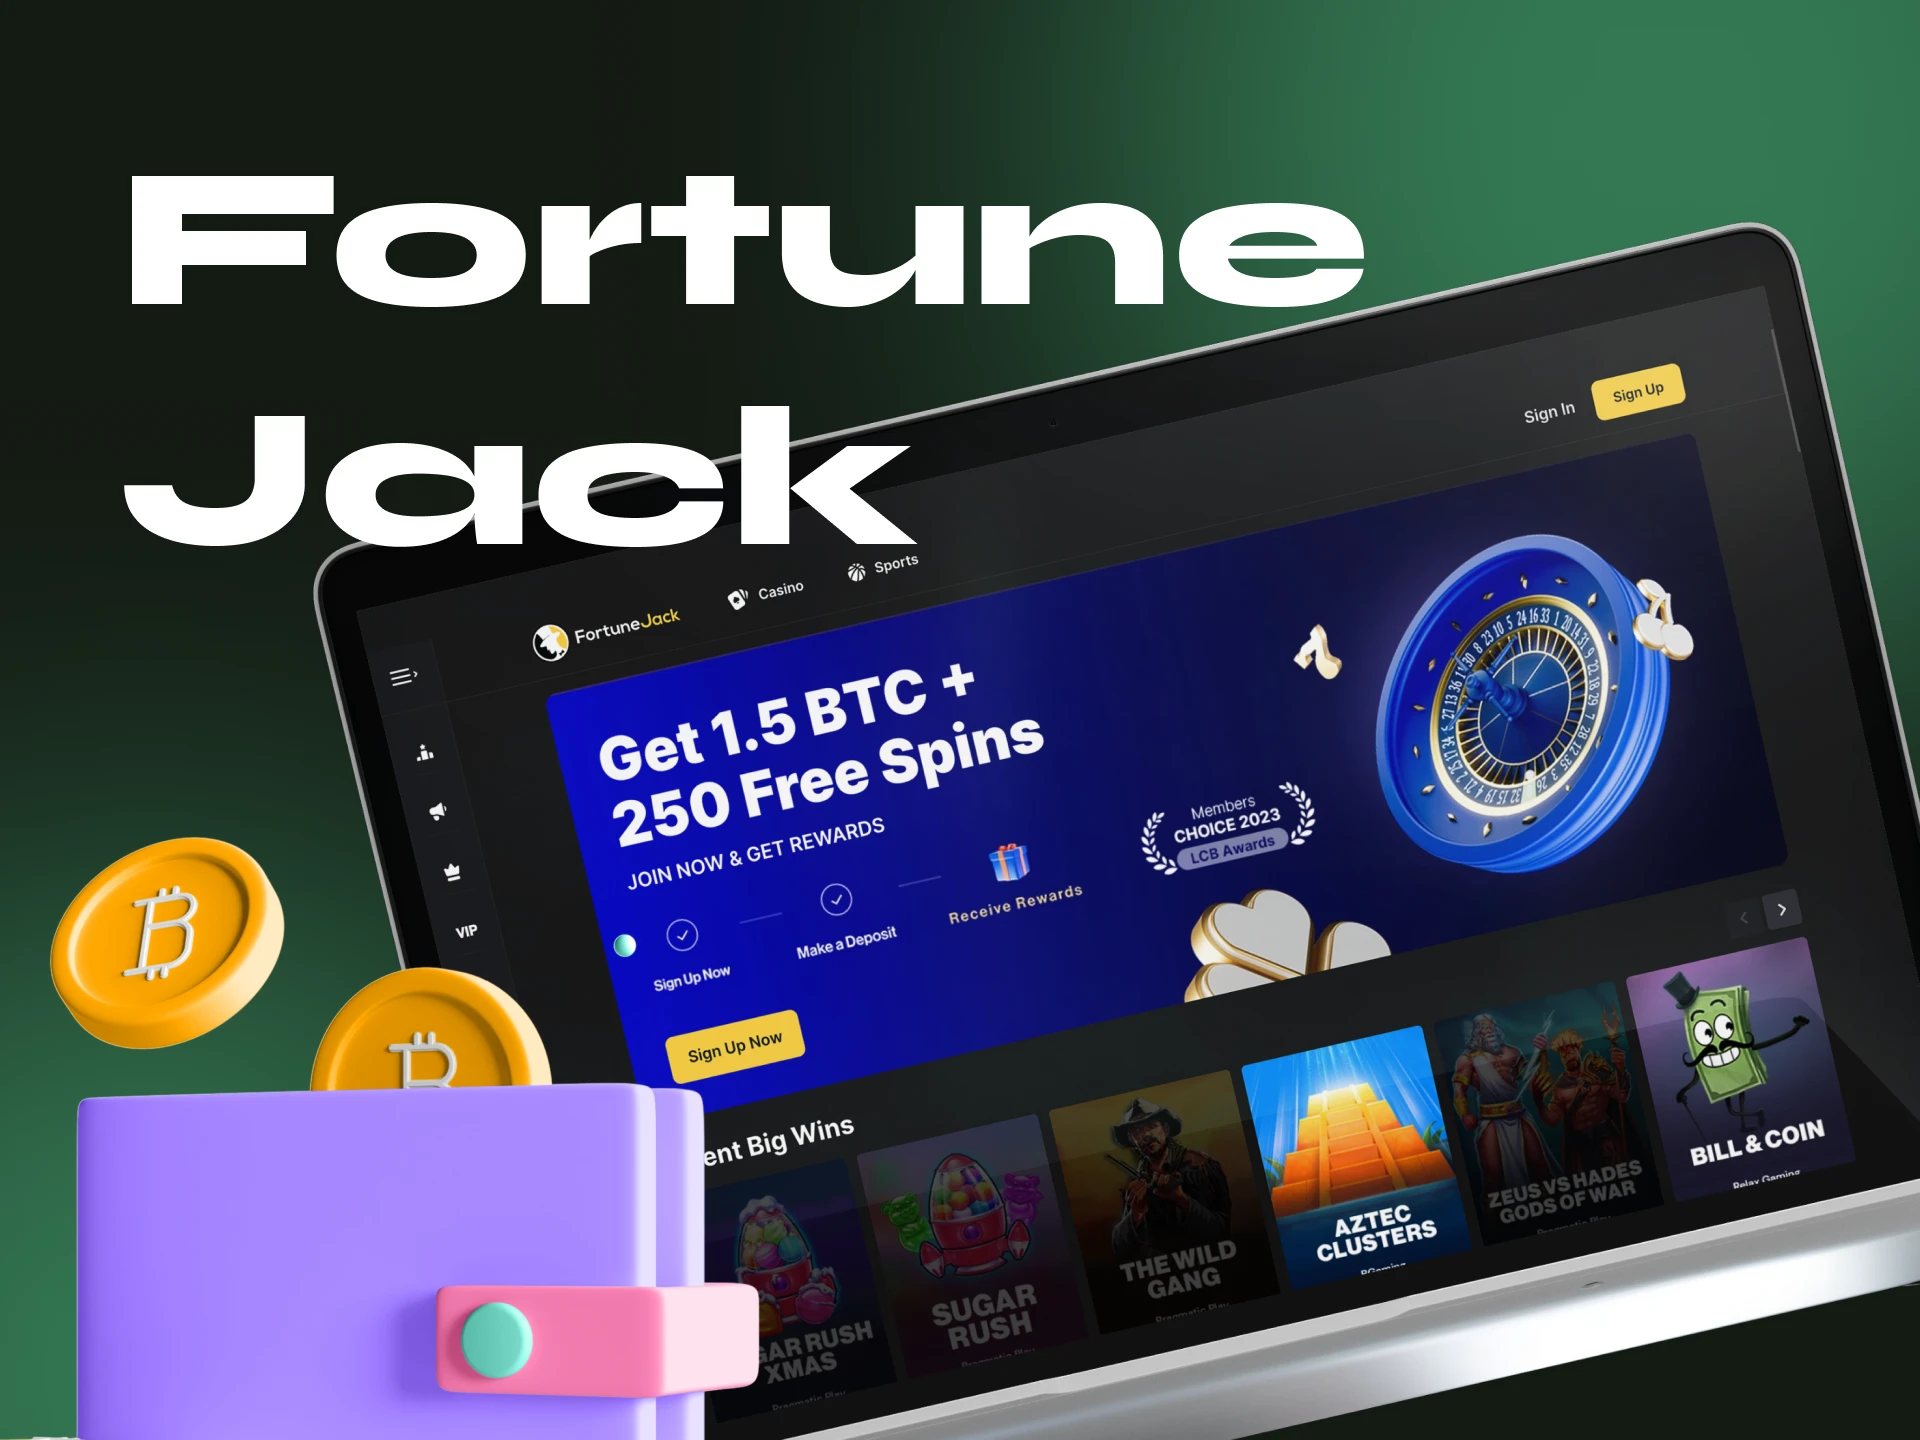 FortuneJack Casino has a user-friendly interface and a varied selection of games.